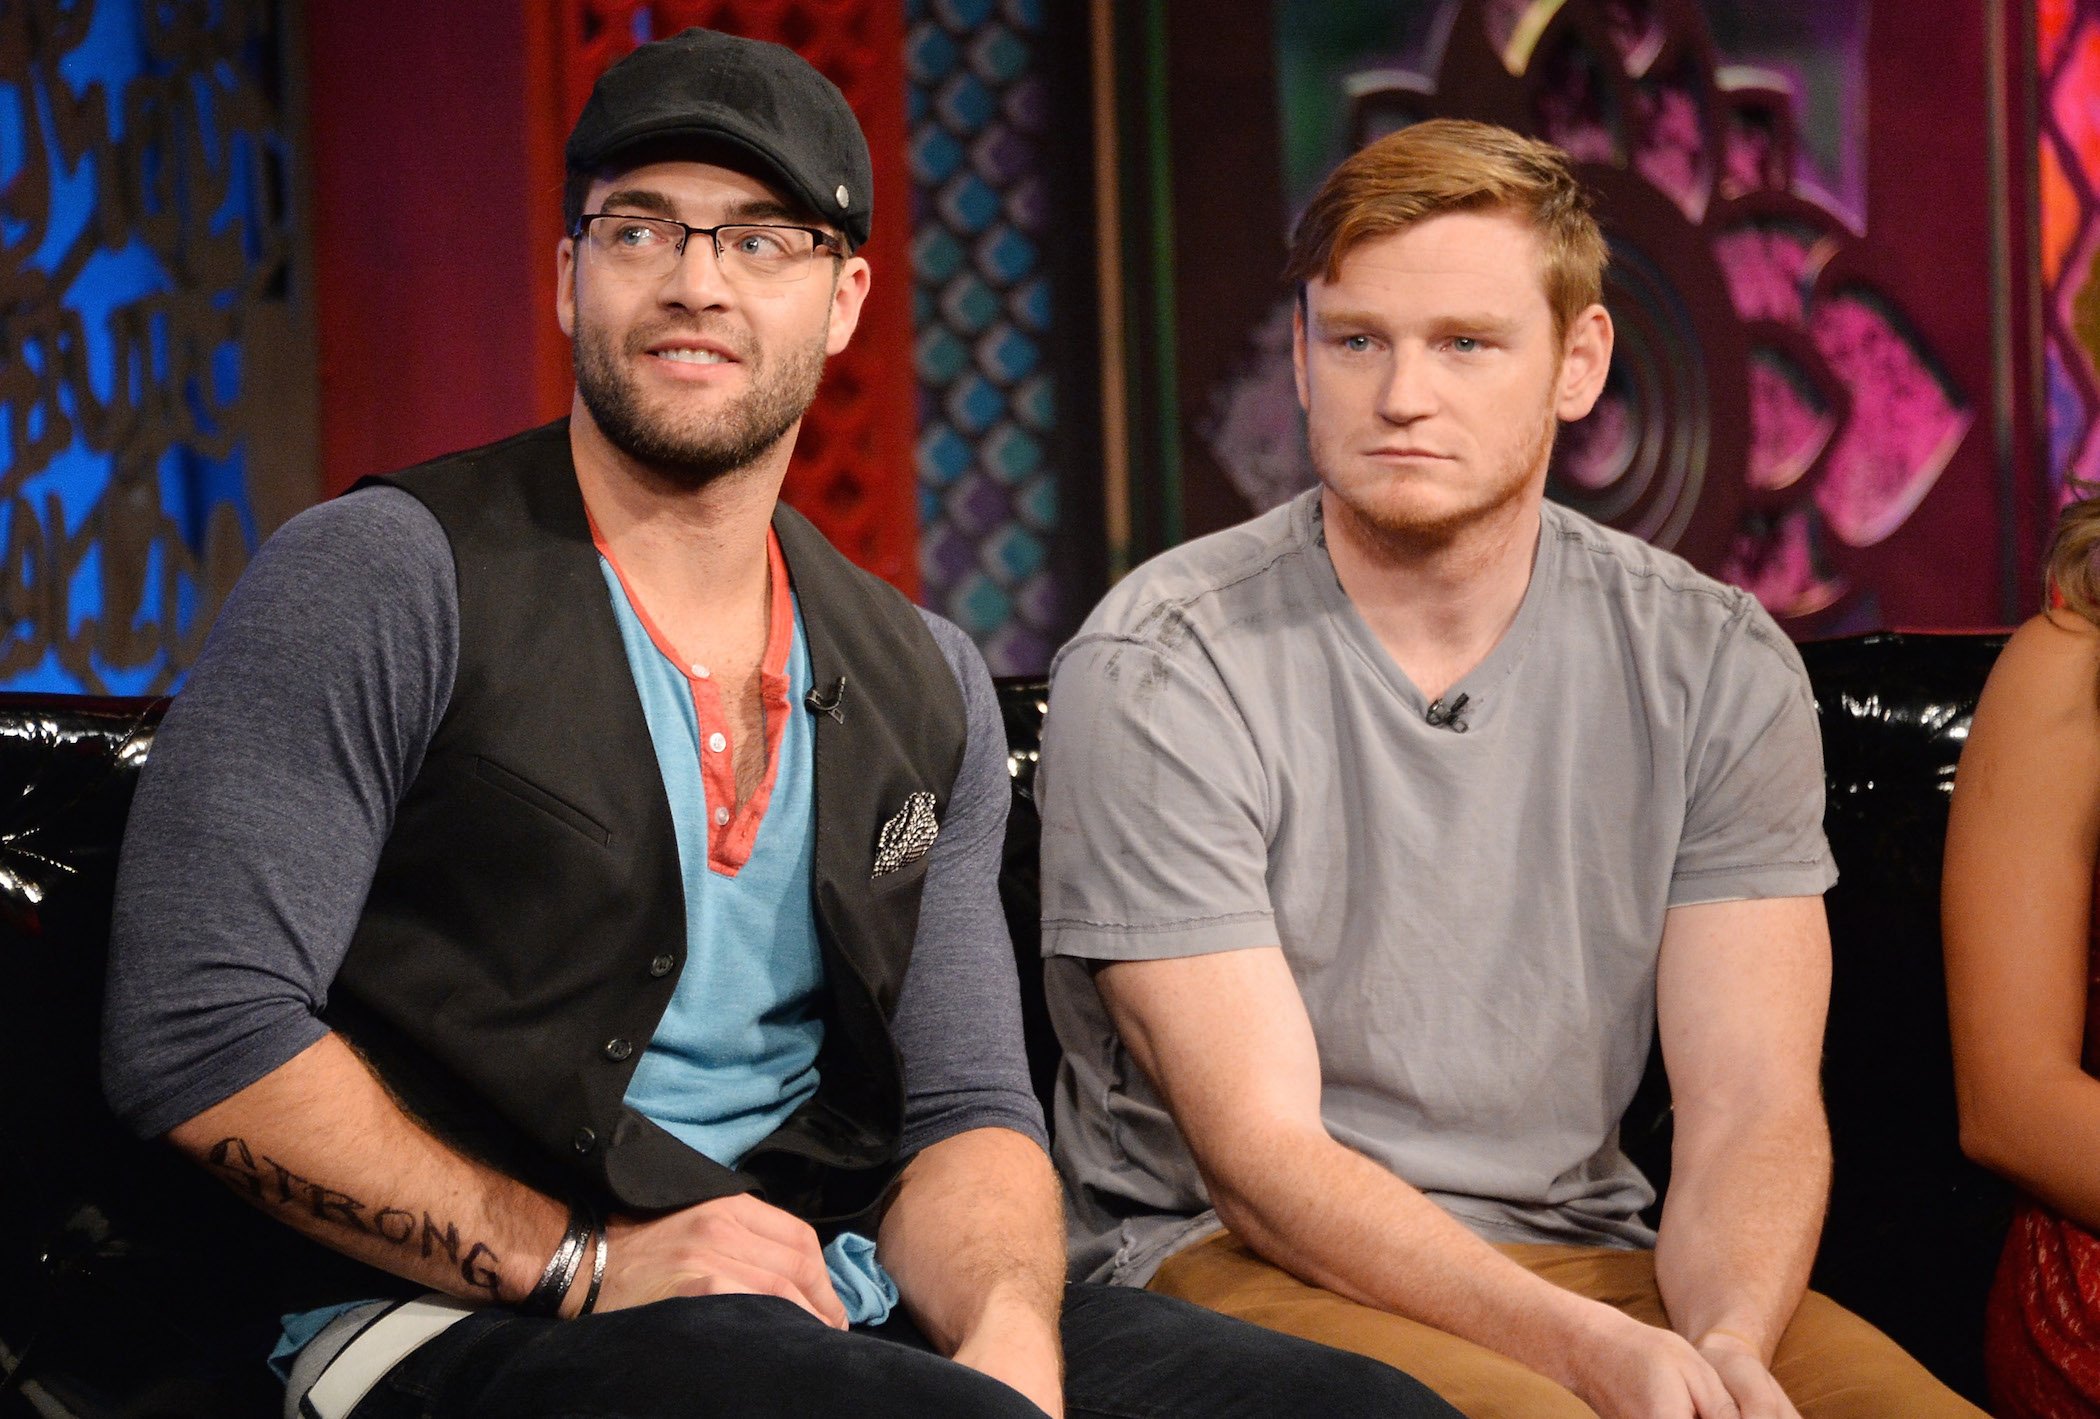 CT Tamburello and Wes Bergmann sitting together during a reunion of MTV's 'The Challenge'